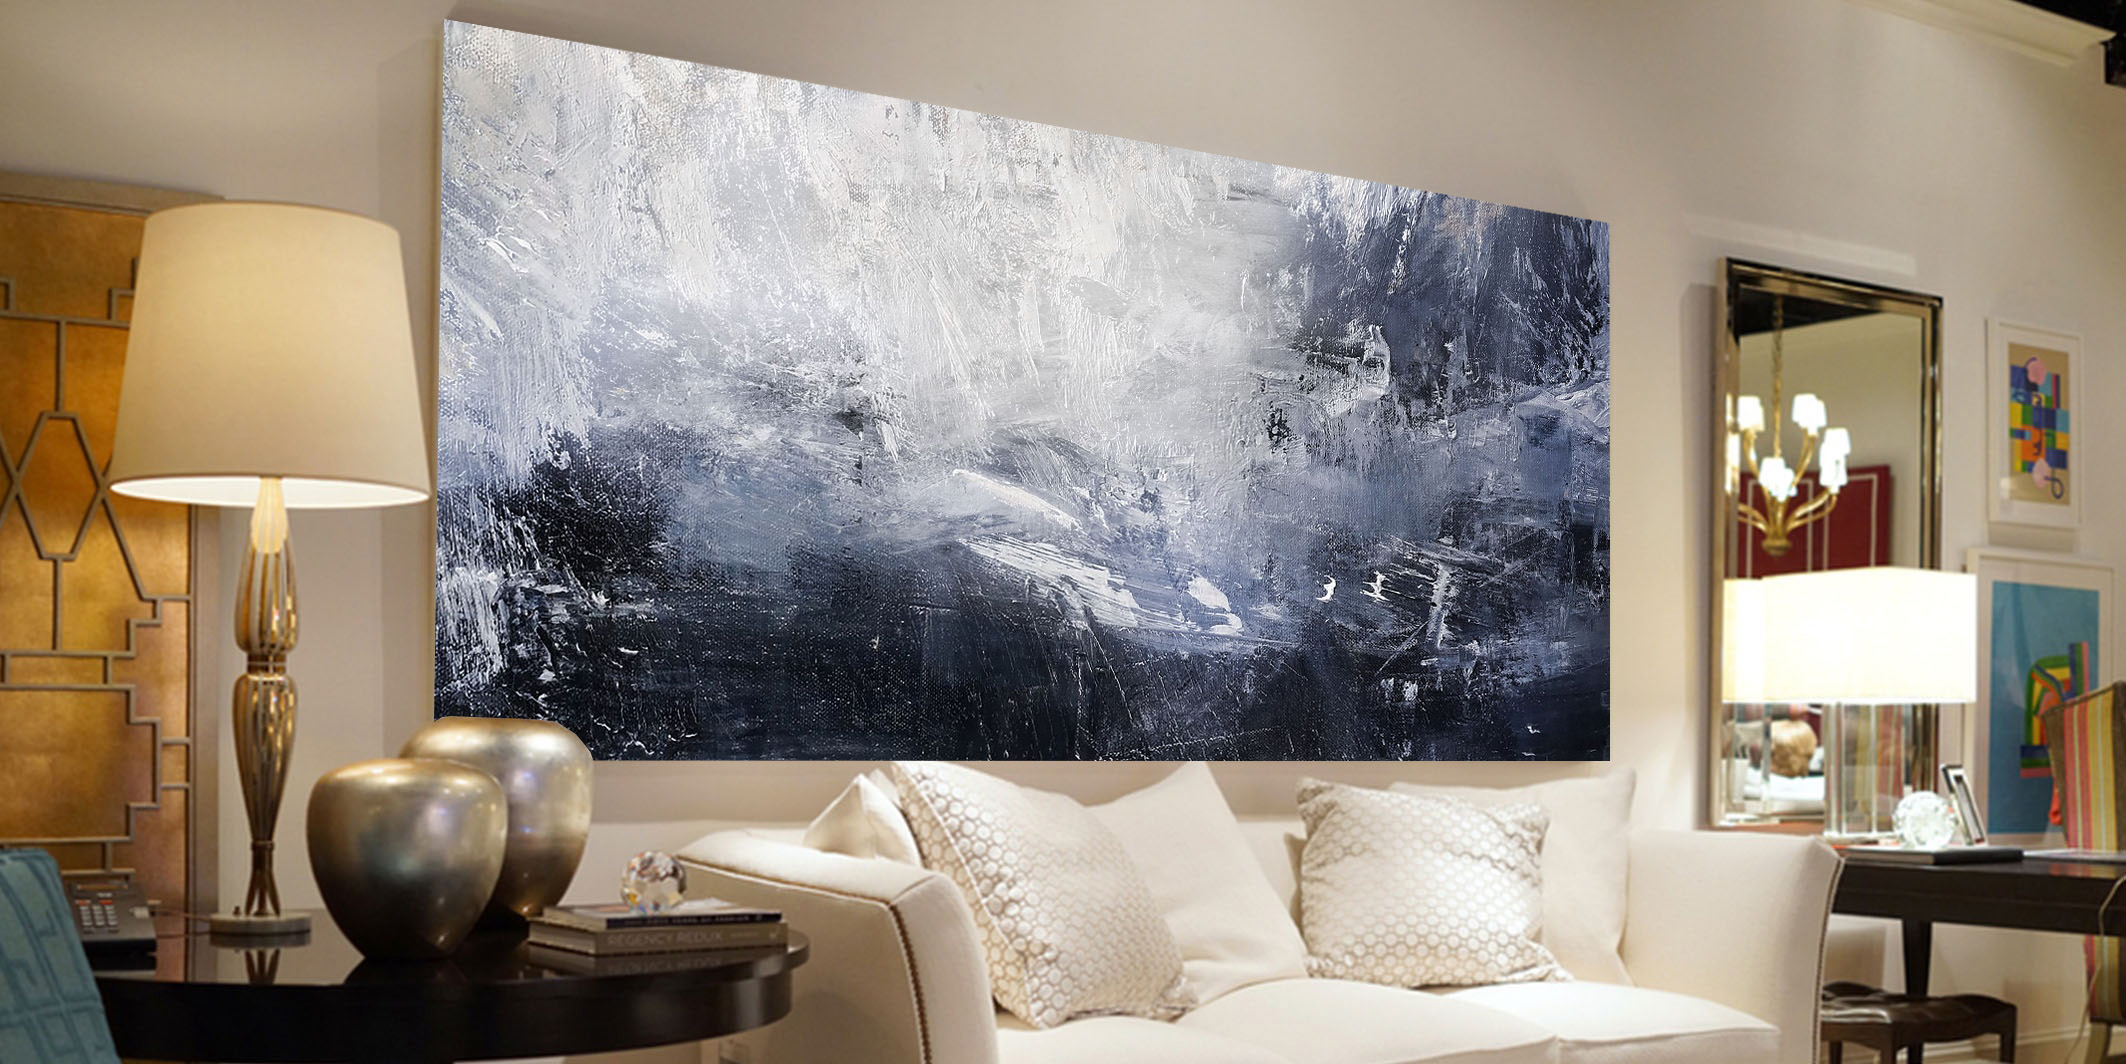 How to install a large wall art